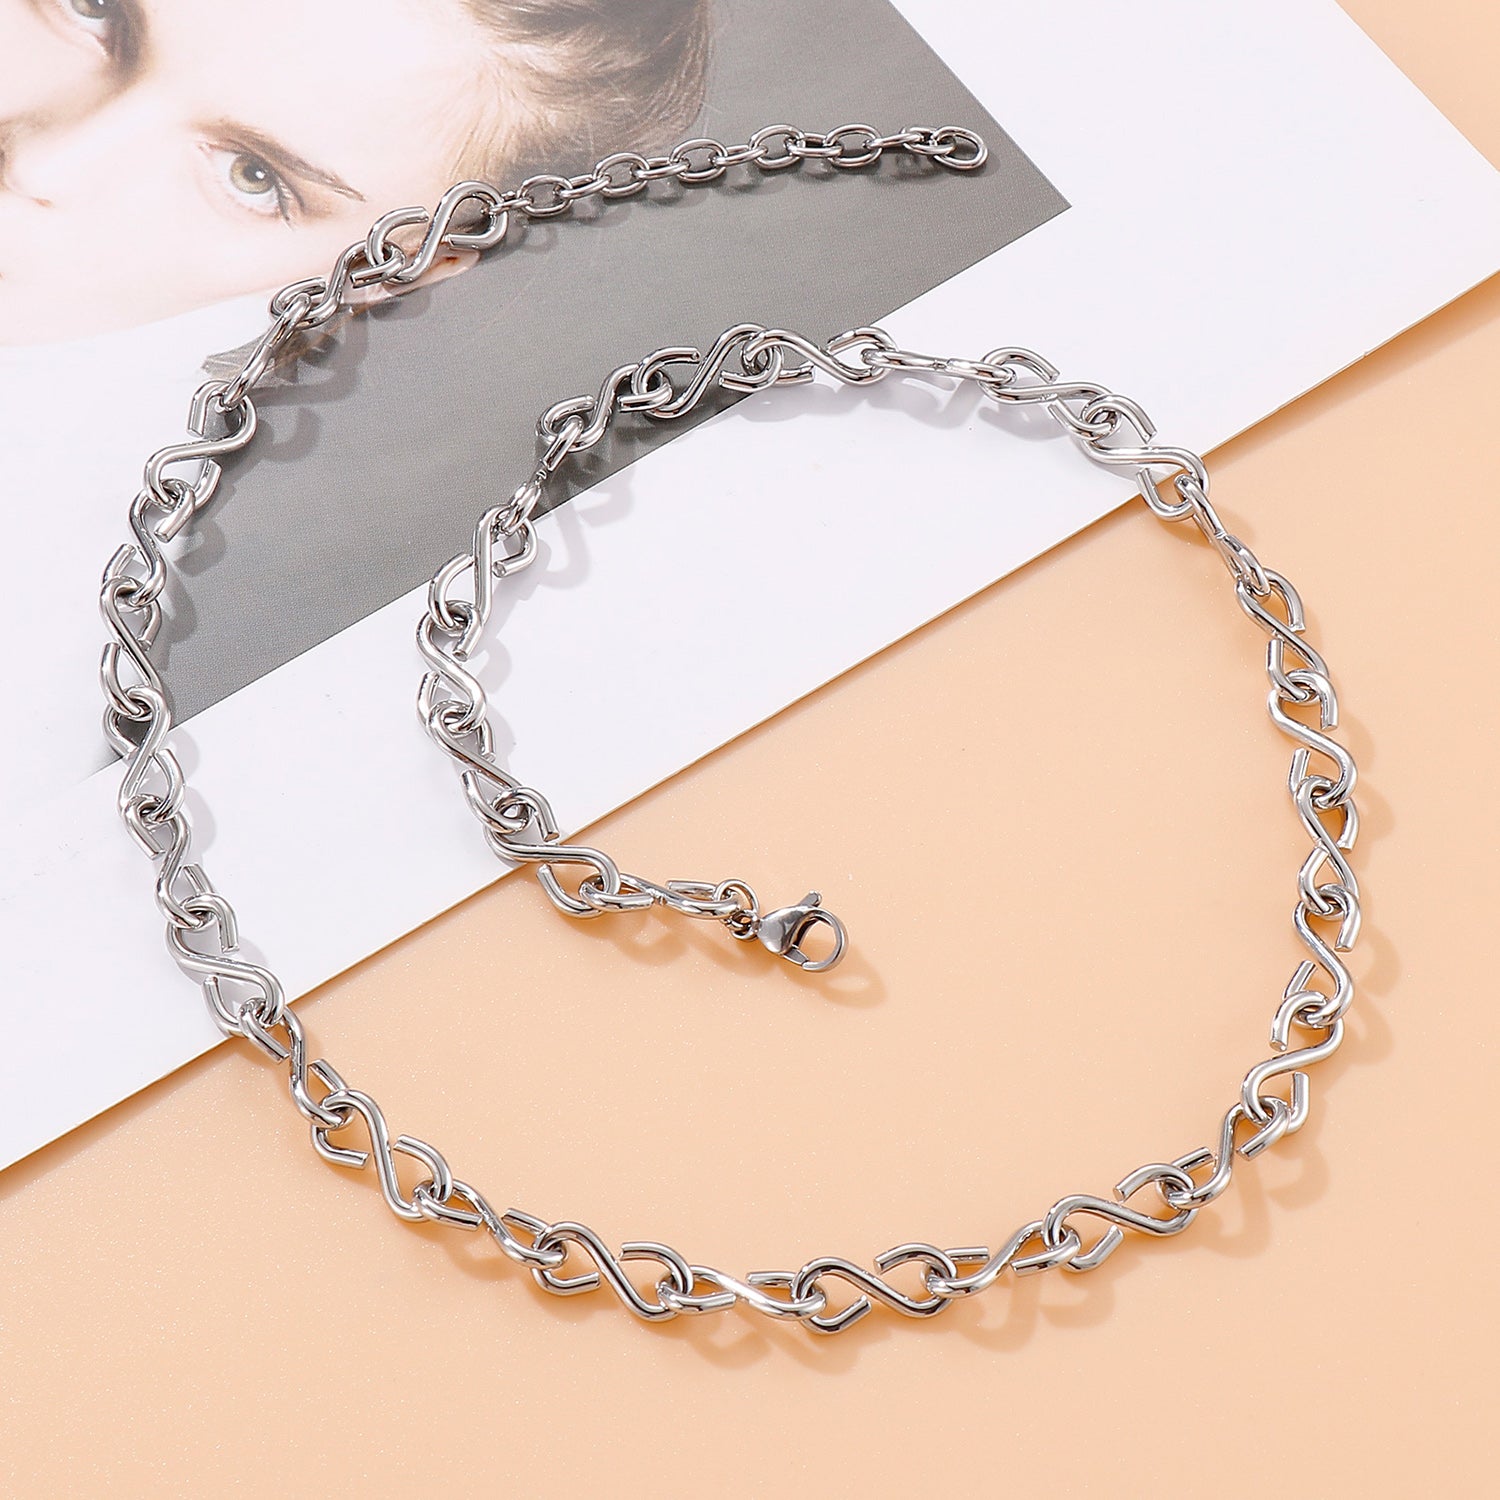 Stainless Steel Chain Necklace with Easy-to-Use Lobster Closure